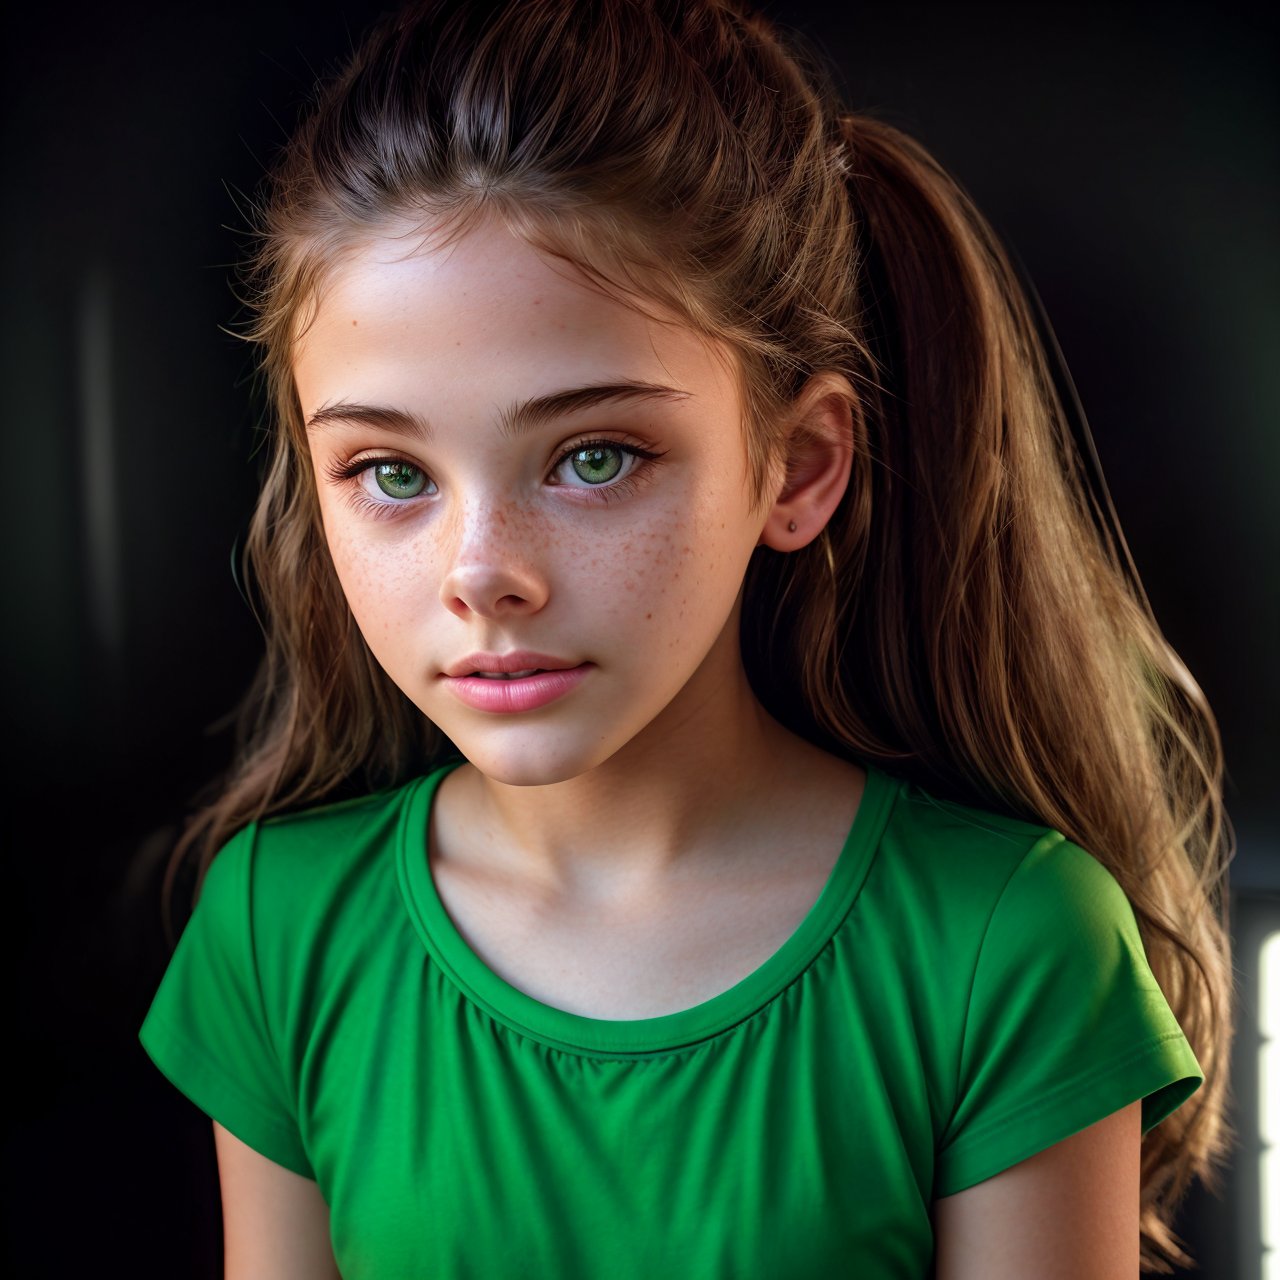 best quality, extra resolution, close up portrait of adorable (AIDA_LoRA_MeW2016:1.1) <lora:AIDA_LoRA_MeW2016:0.9> in (simple green t-shirt:1.1), [little girl], glossy skin with visible pores and freckles, pretty face, naughty, playful, intimate, flirting, cinematic, studio photo, kkw-ph1, (colorful:1.1), (charcoal smoky black background:1.1)